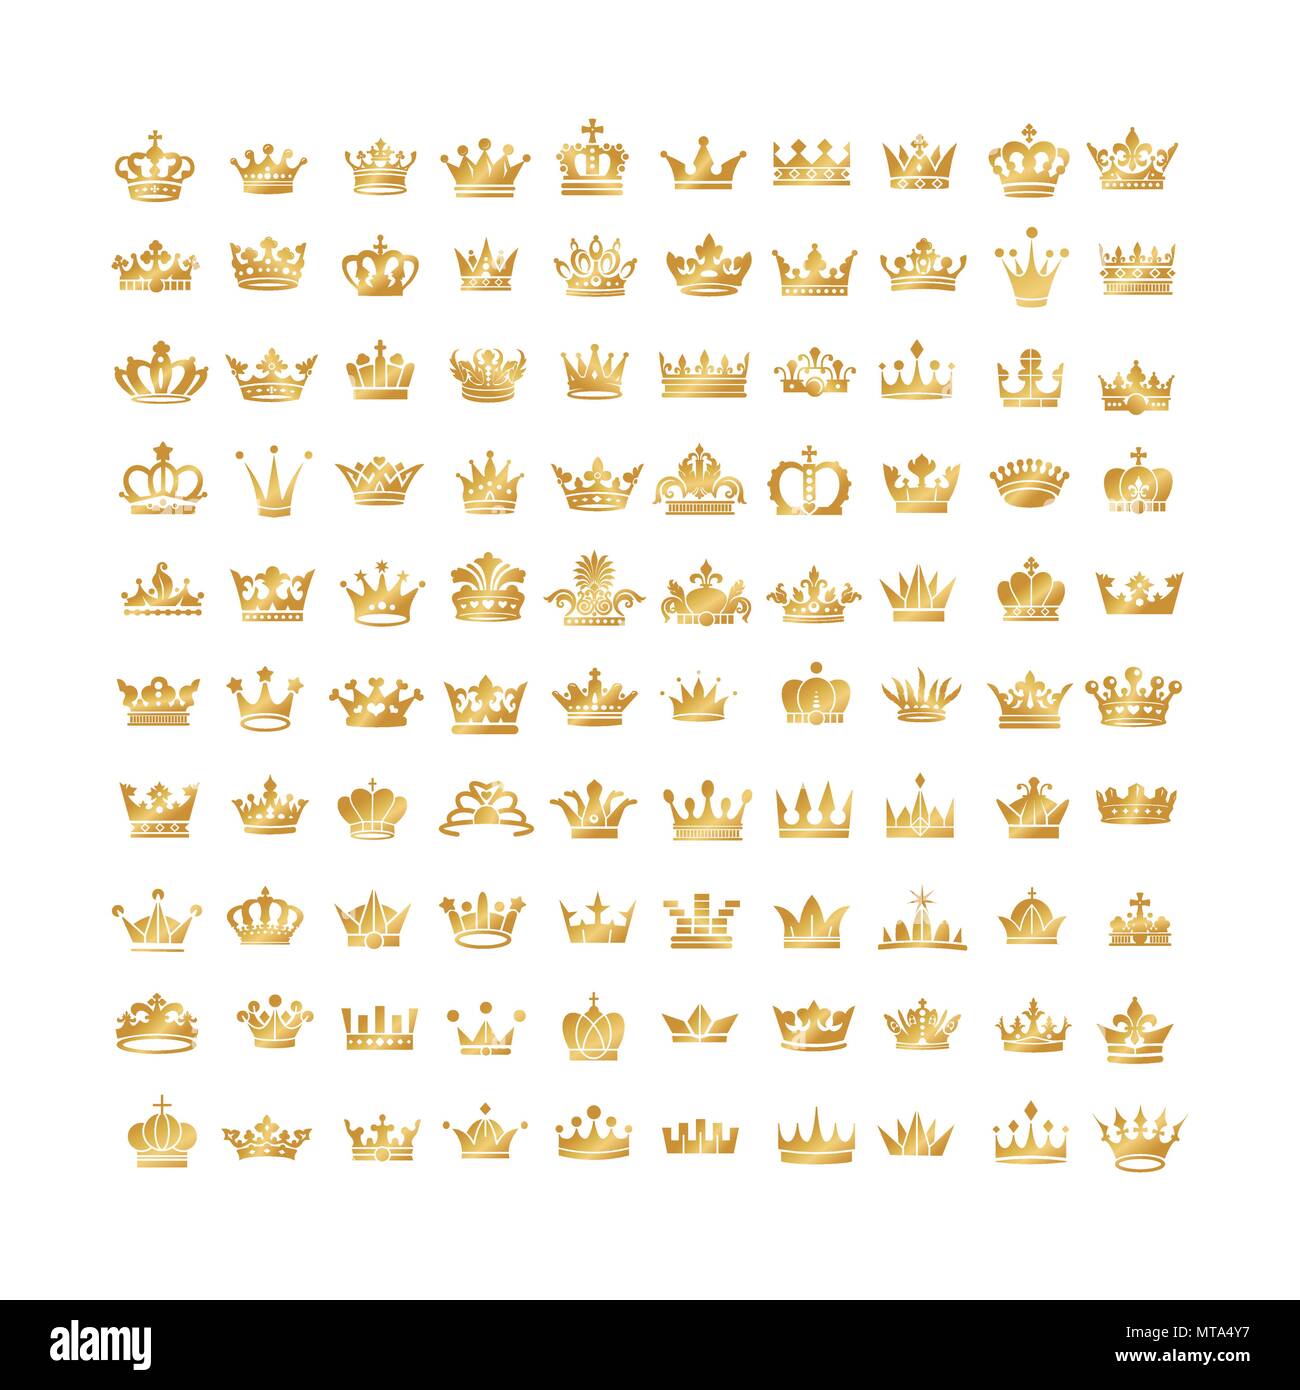 Vector Collection Of Creative King And Queen Crowns Silhouette Or